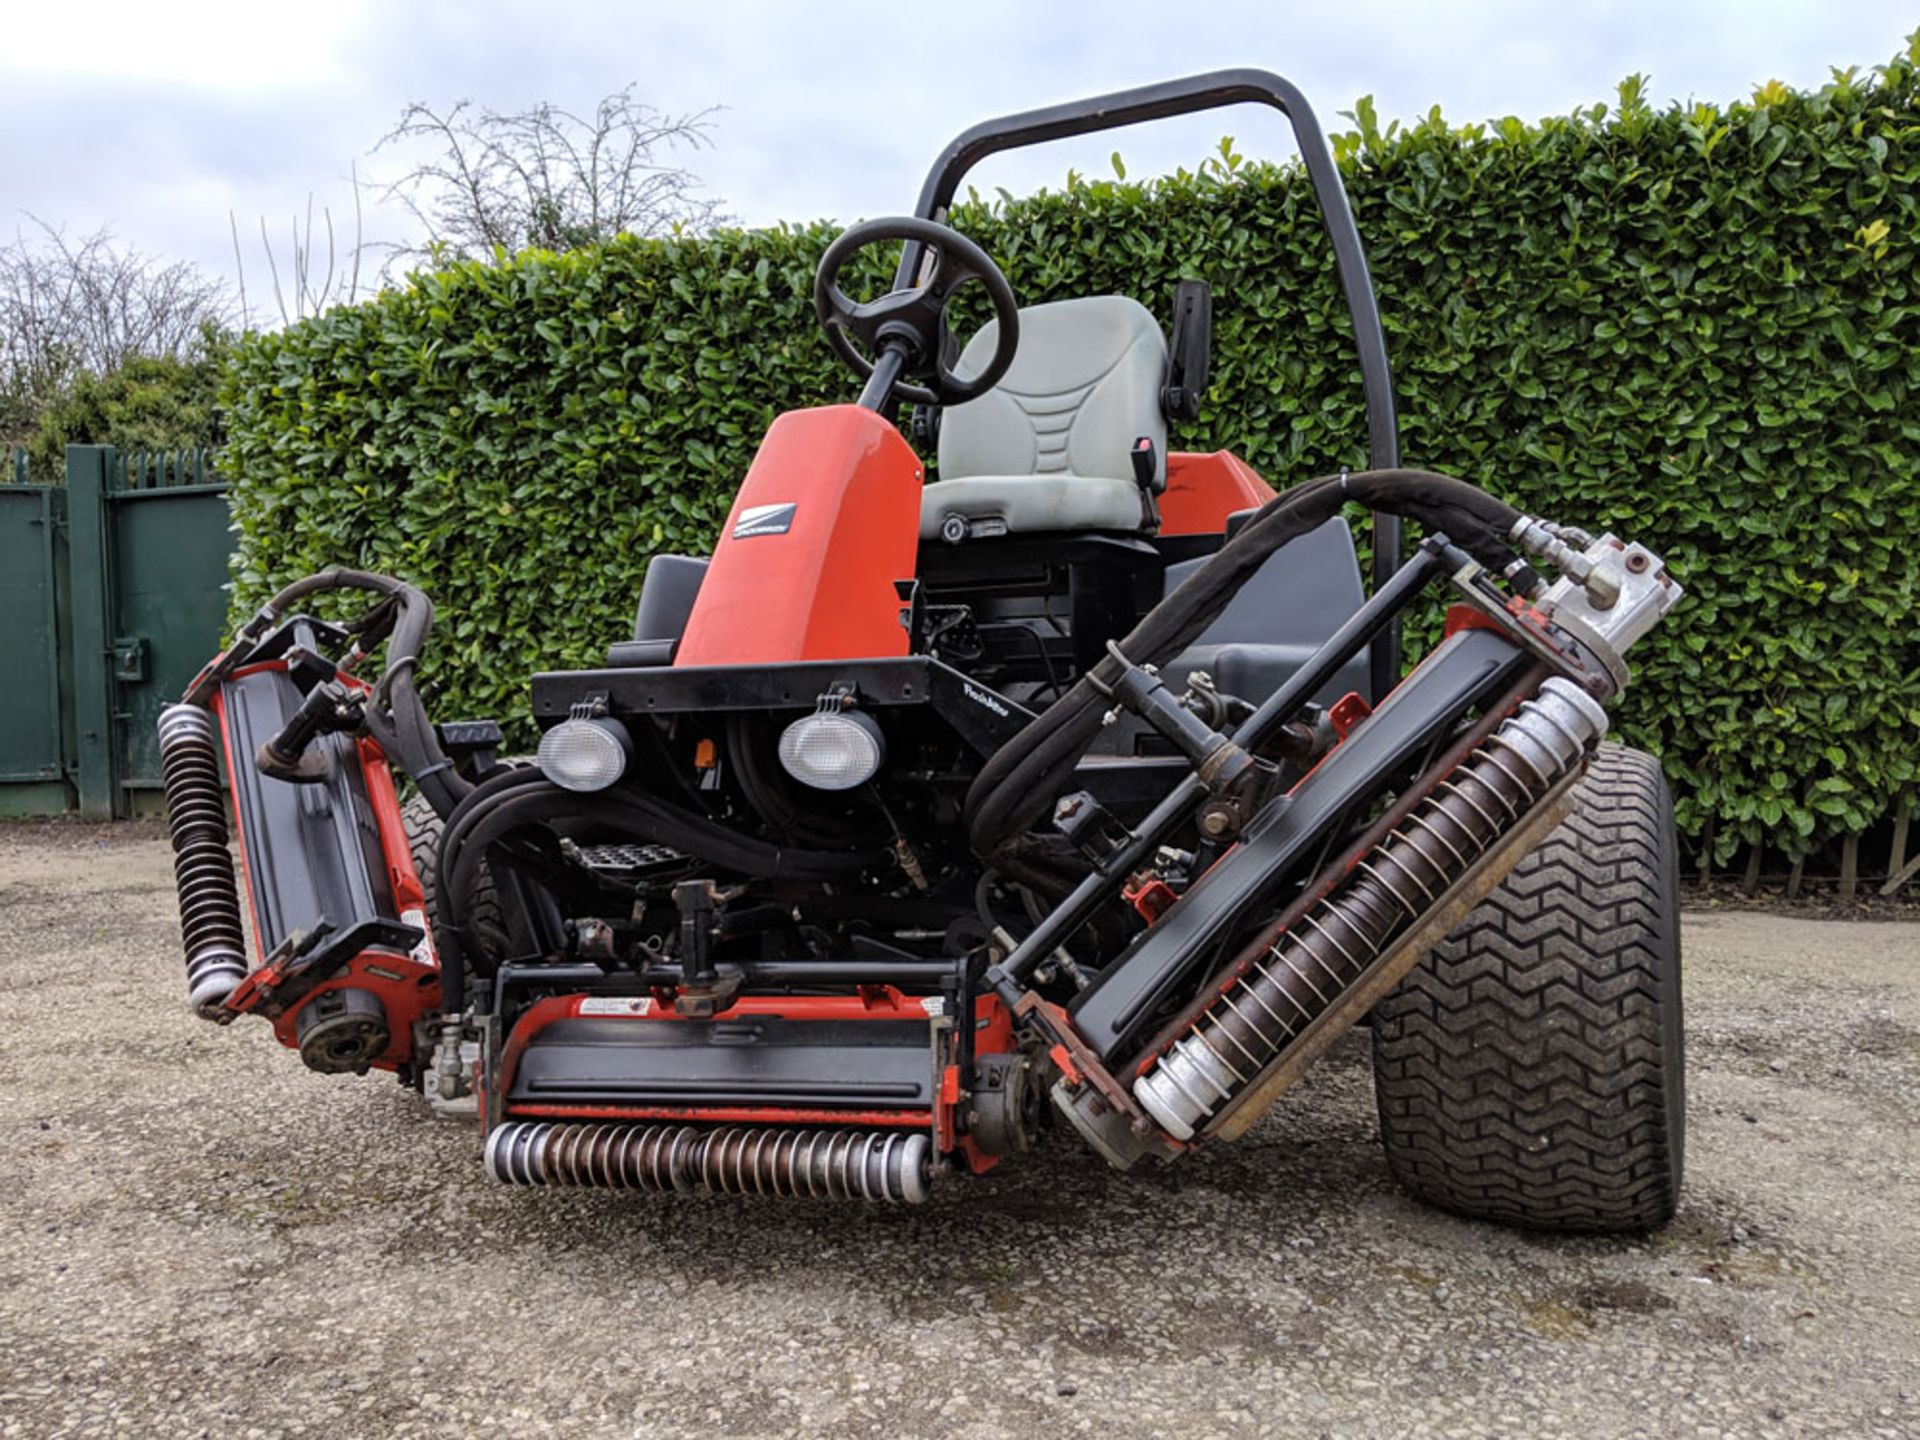 2007 Ransomes Jacobsen LF3800 4WD Cylinder Mower - Image 9 of 9